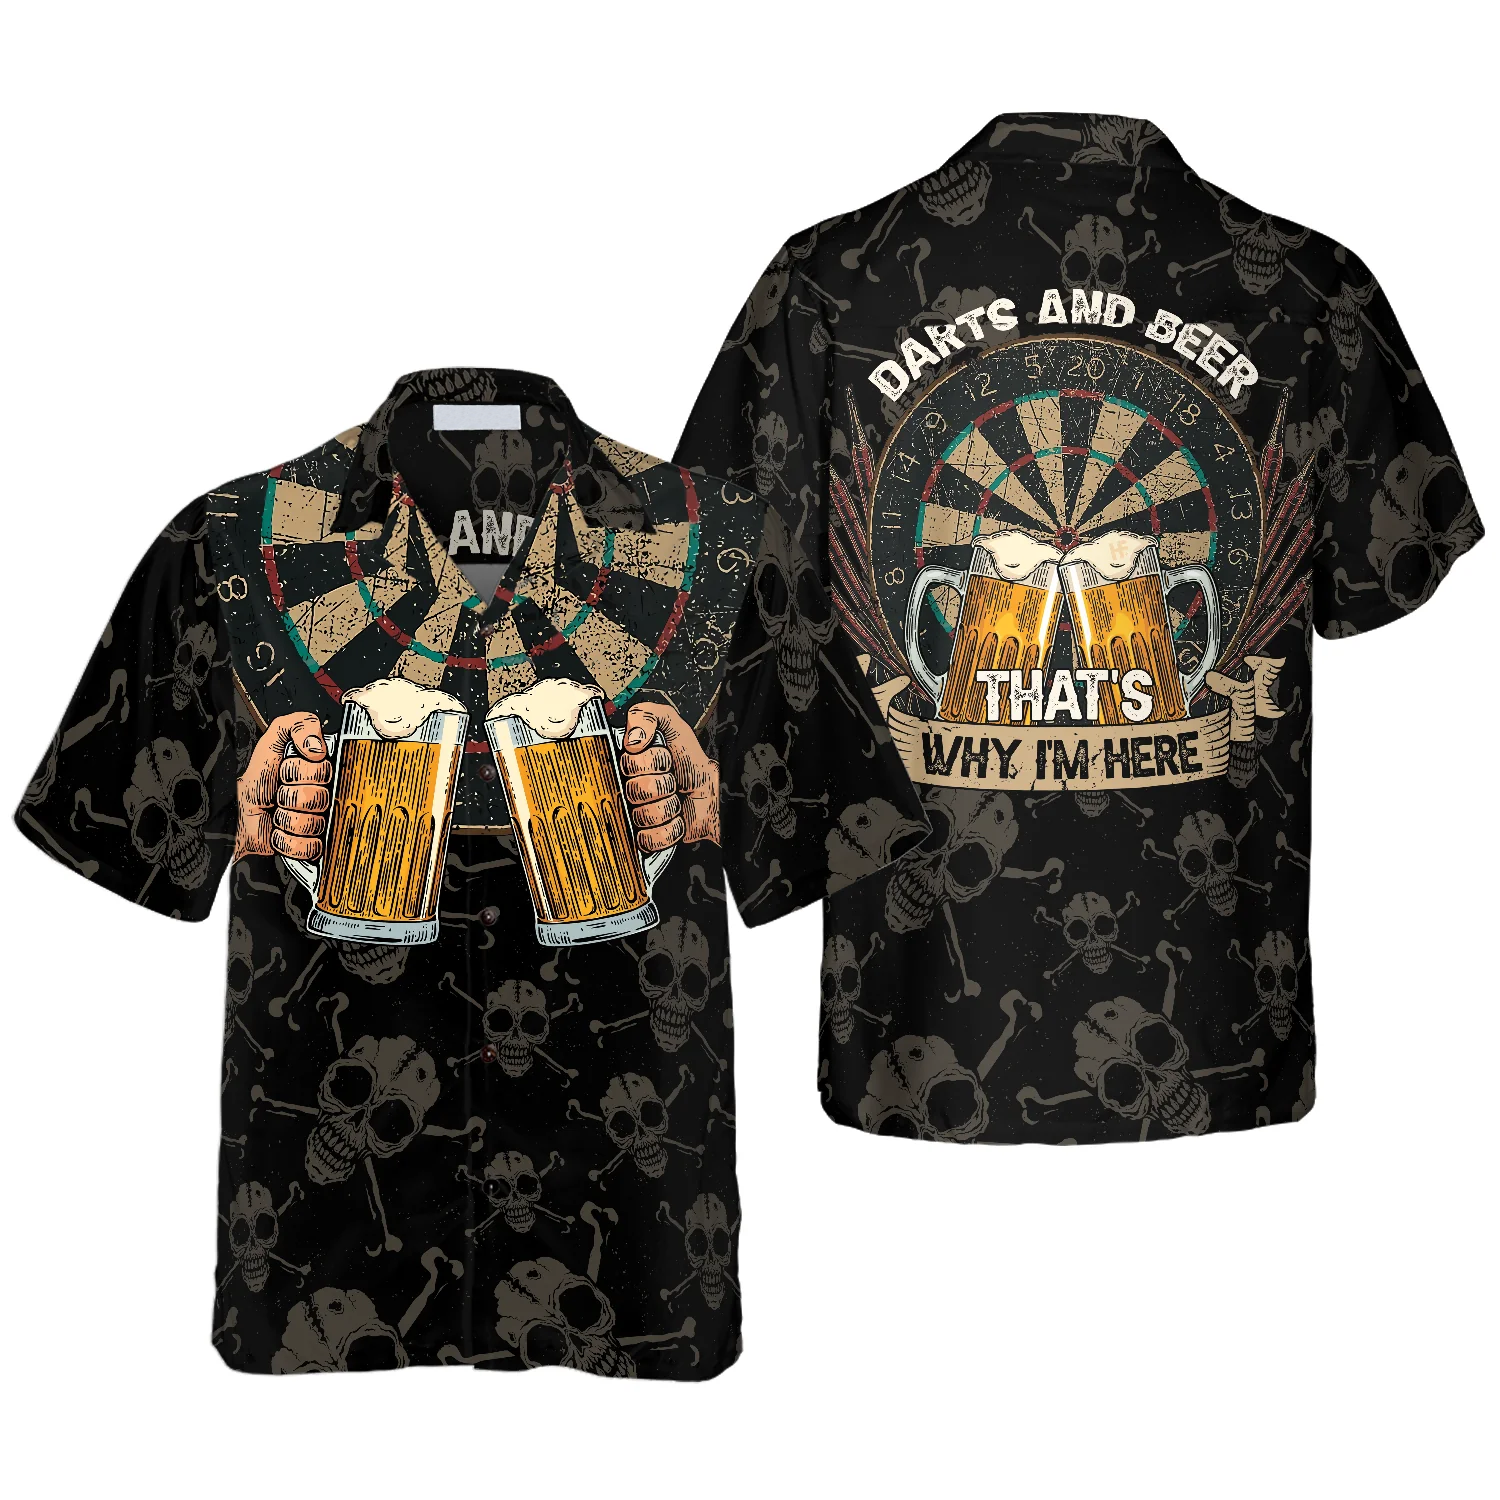 Darts And Beer That''s Why I''m Here Aloha Hawaiian Shirt For Summer/ Colorful Shirt For Men Women/ Perfect Gift For Friend/ Team/ Darts Beer Lovers